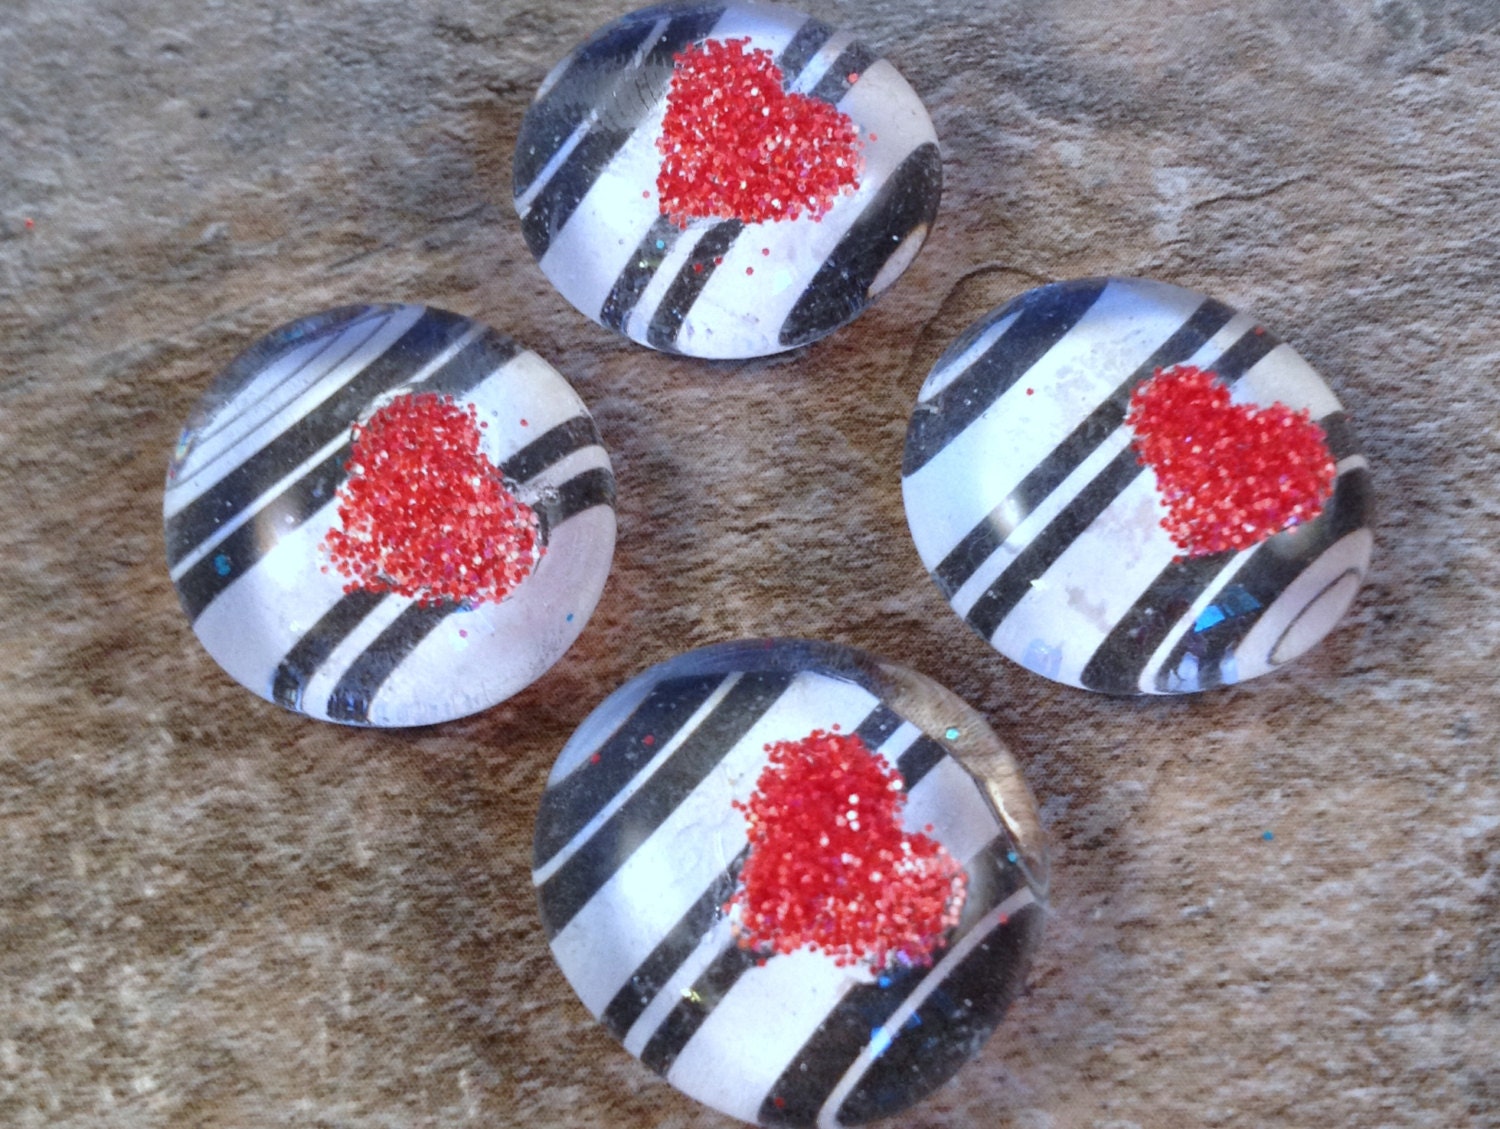 Set of 4 Black and White Striped, Glitter Red Heart Valentine's Day Magnets